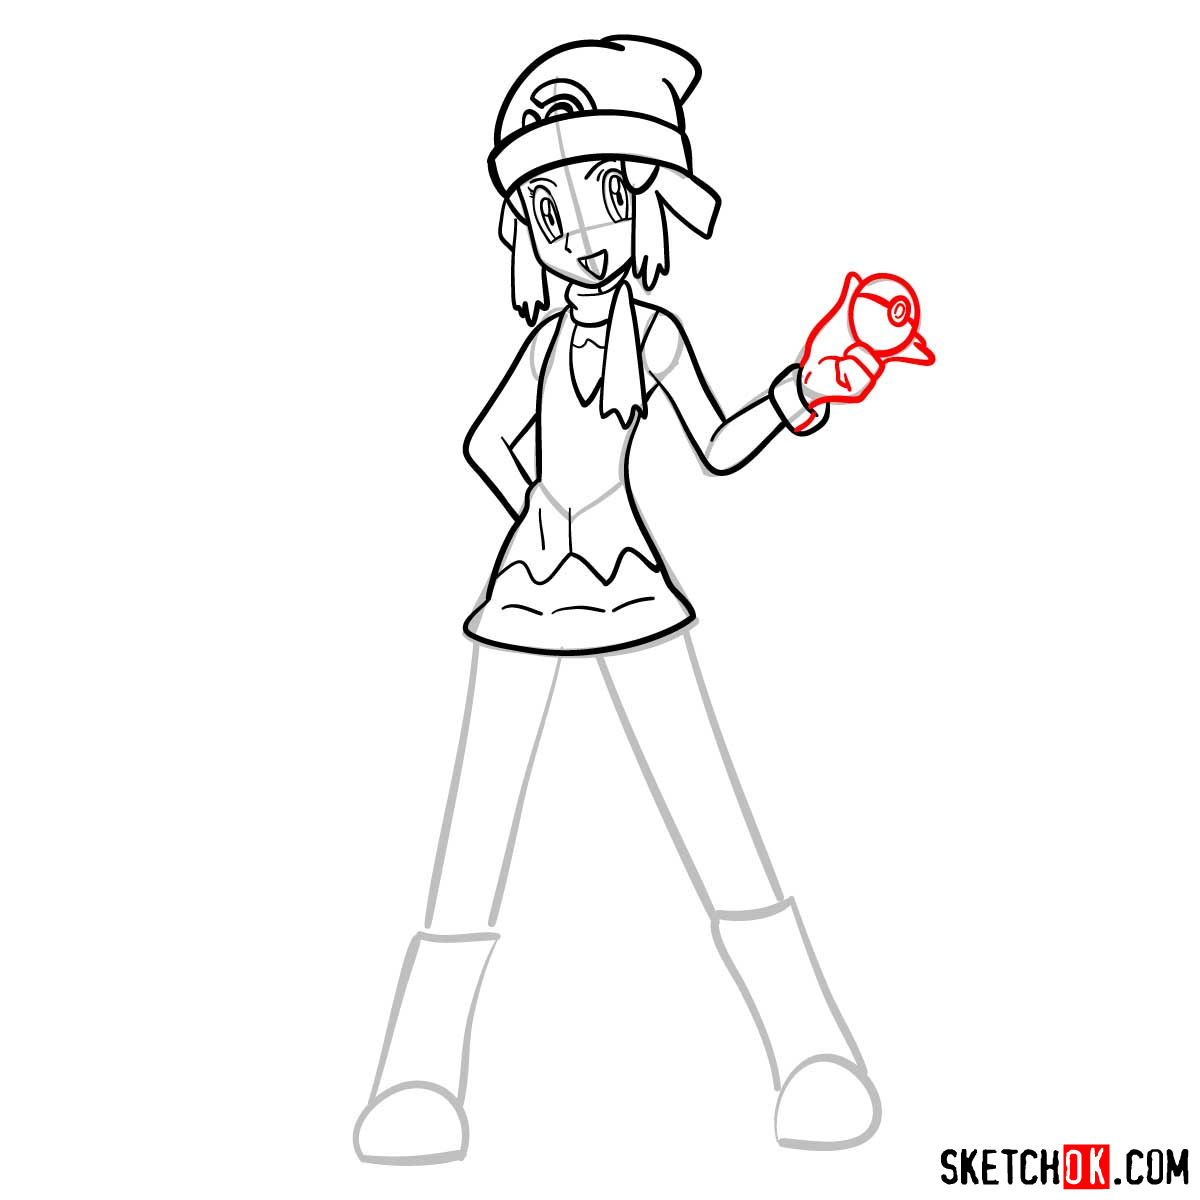 How to draw Dawn from Pokemon anime - step 12